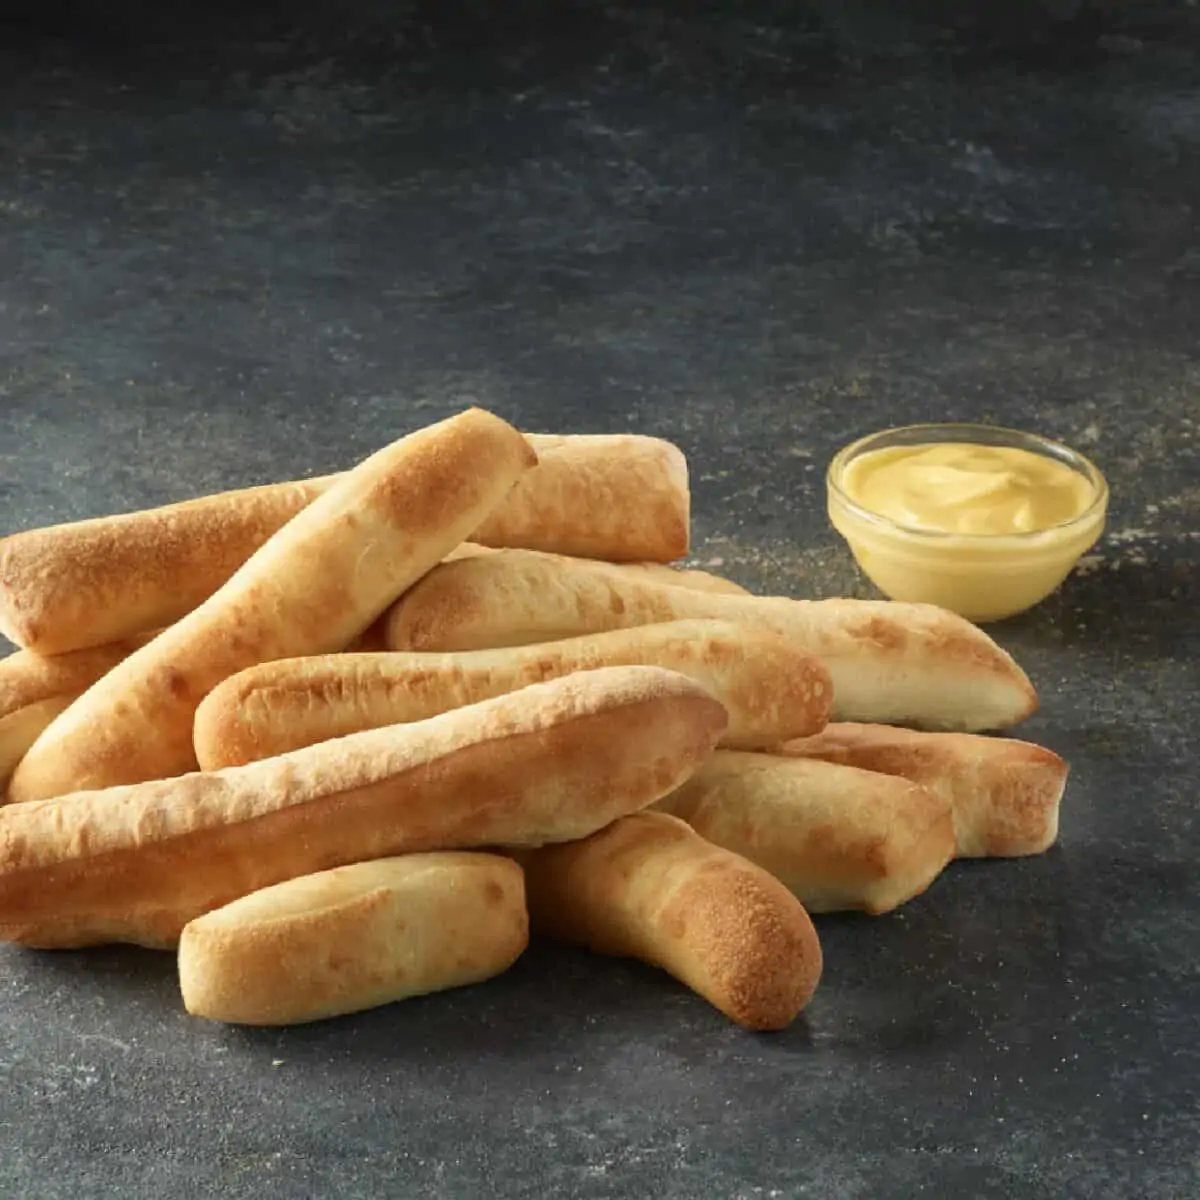 A pile of plain Papa John's breadsticks on a dark gray countertop with a small side of garlic sauce in a clear glass bowl to the right.